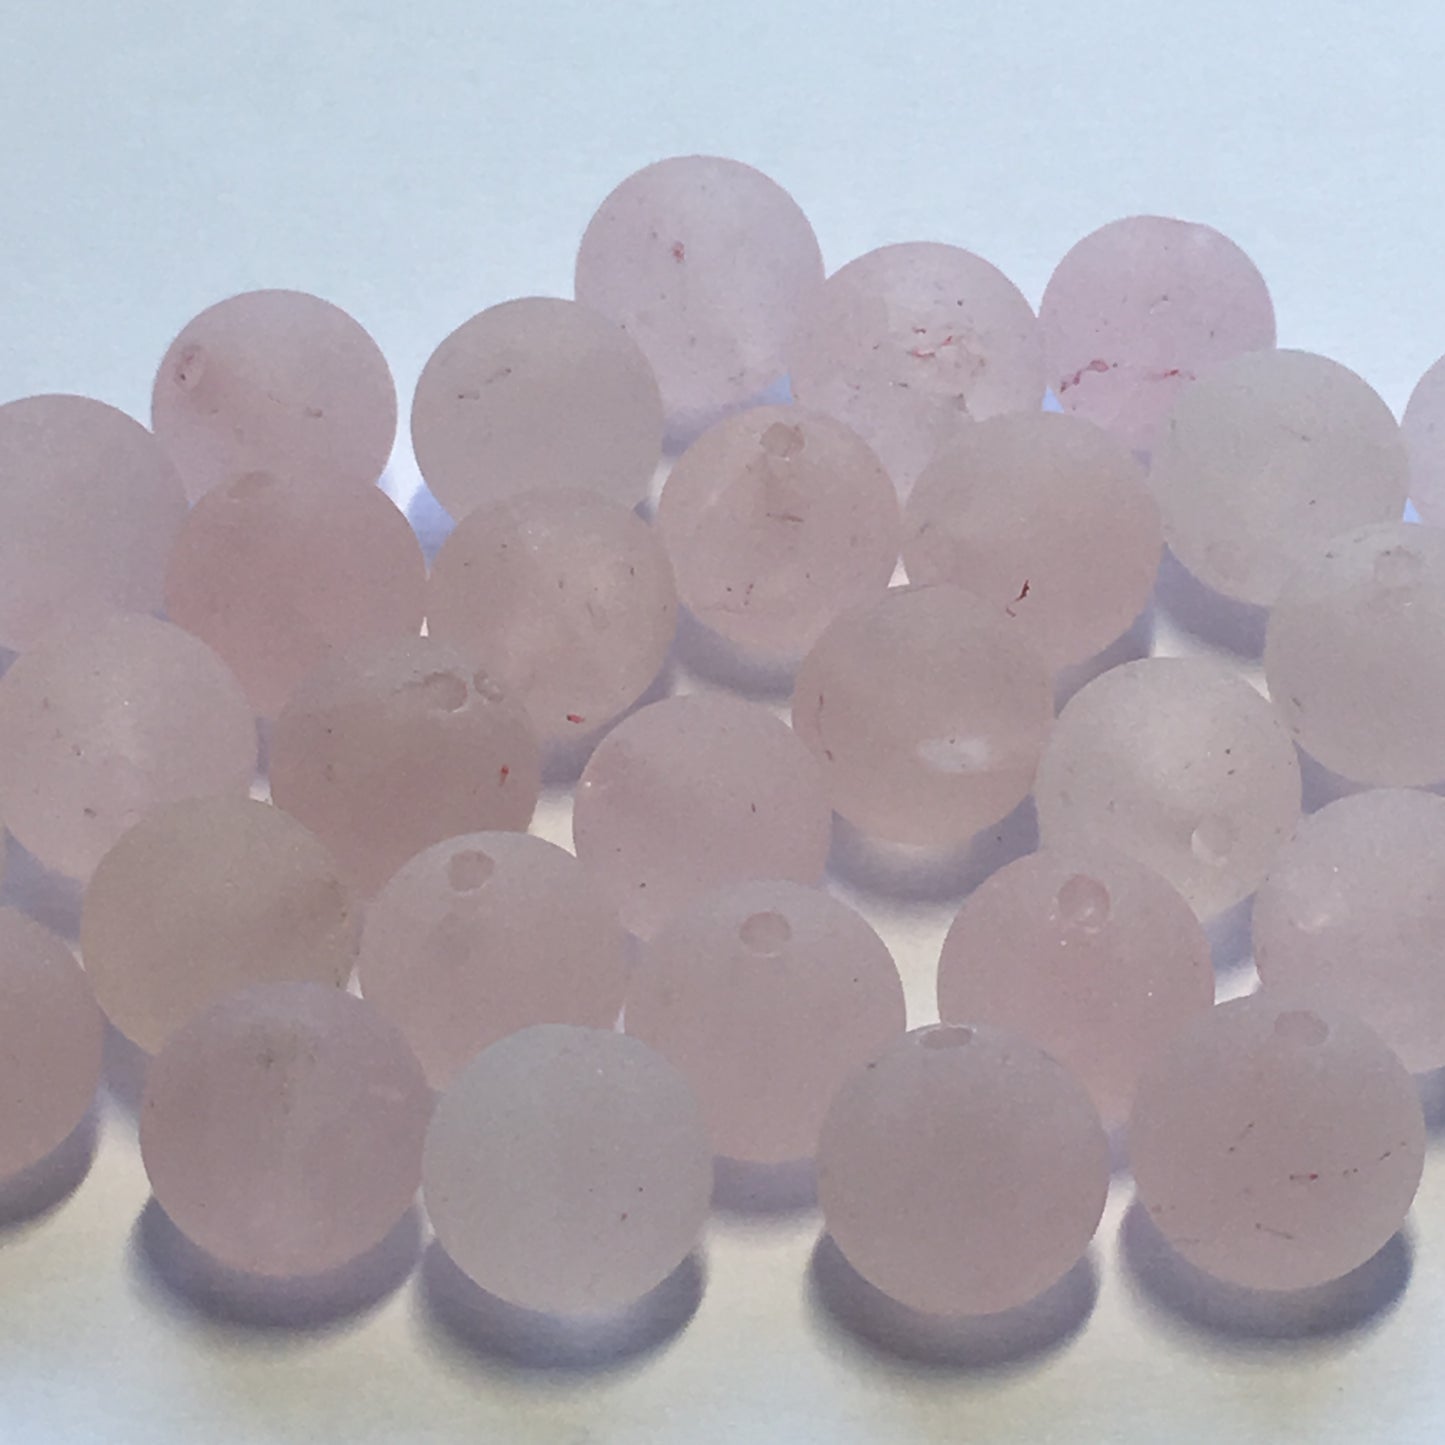 Gently Used Frosted Rose Quartz Semi-Precious Stone Round Beads, 8 mm - 33 Beads